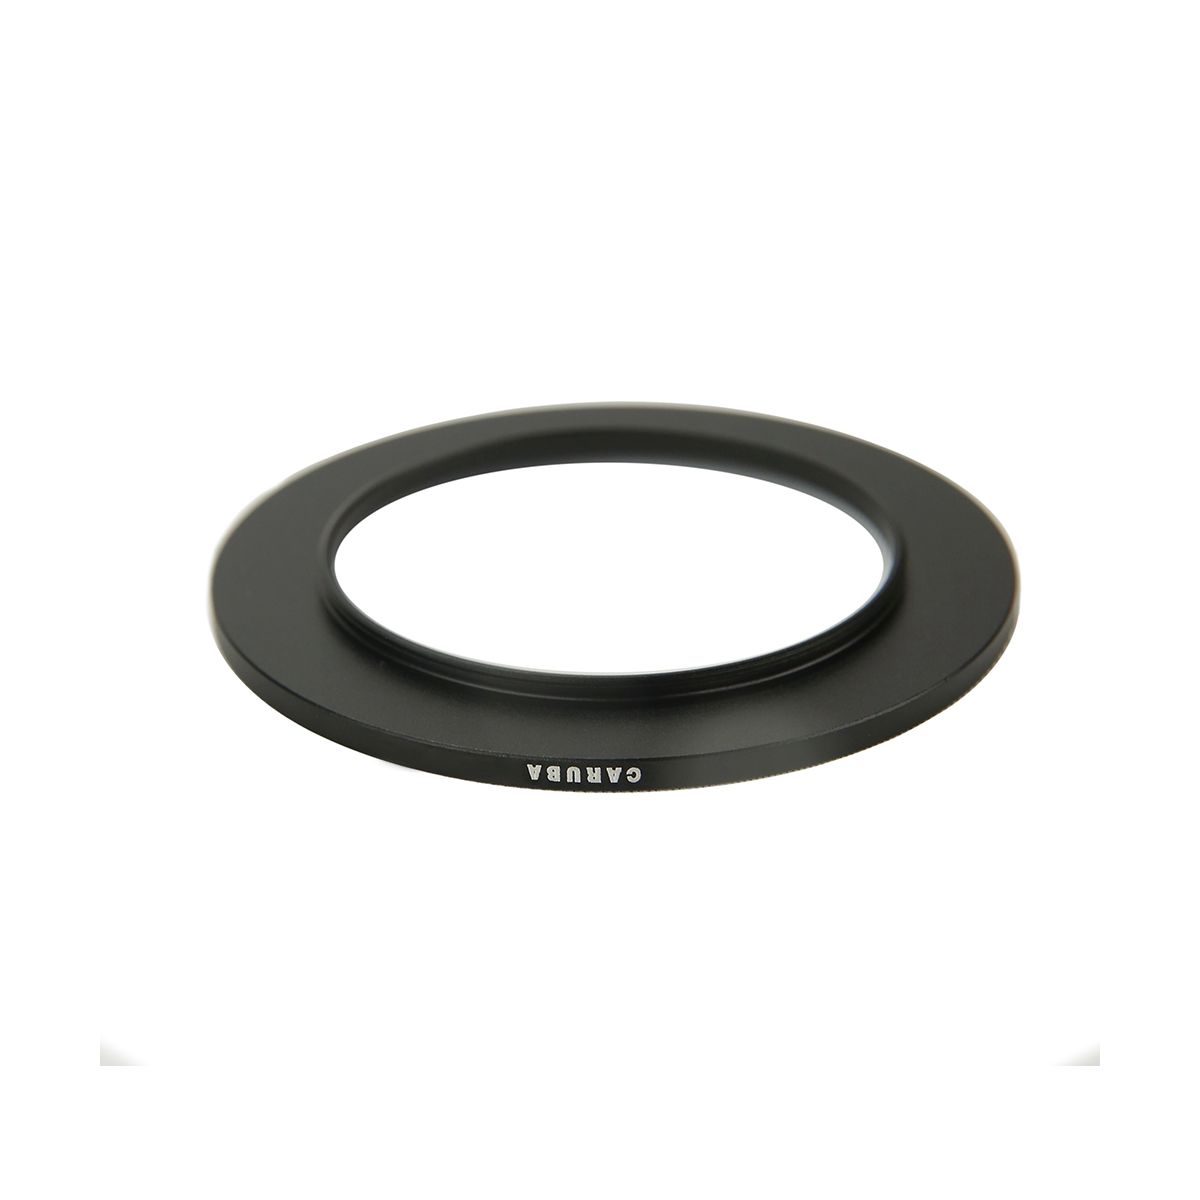 Caruba Step-up/down Ring 60mm - 67mm